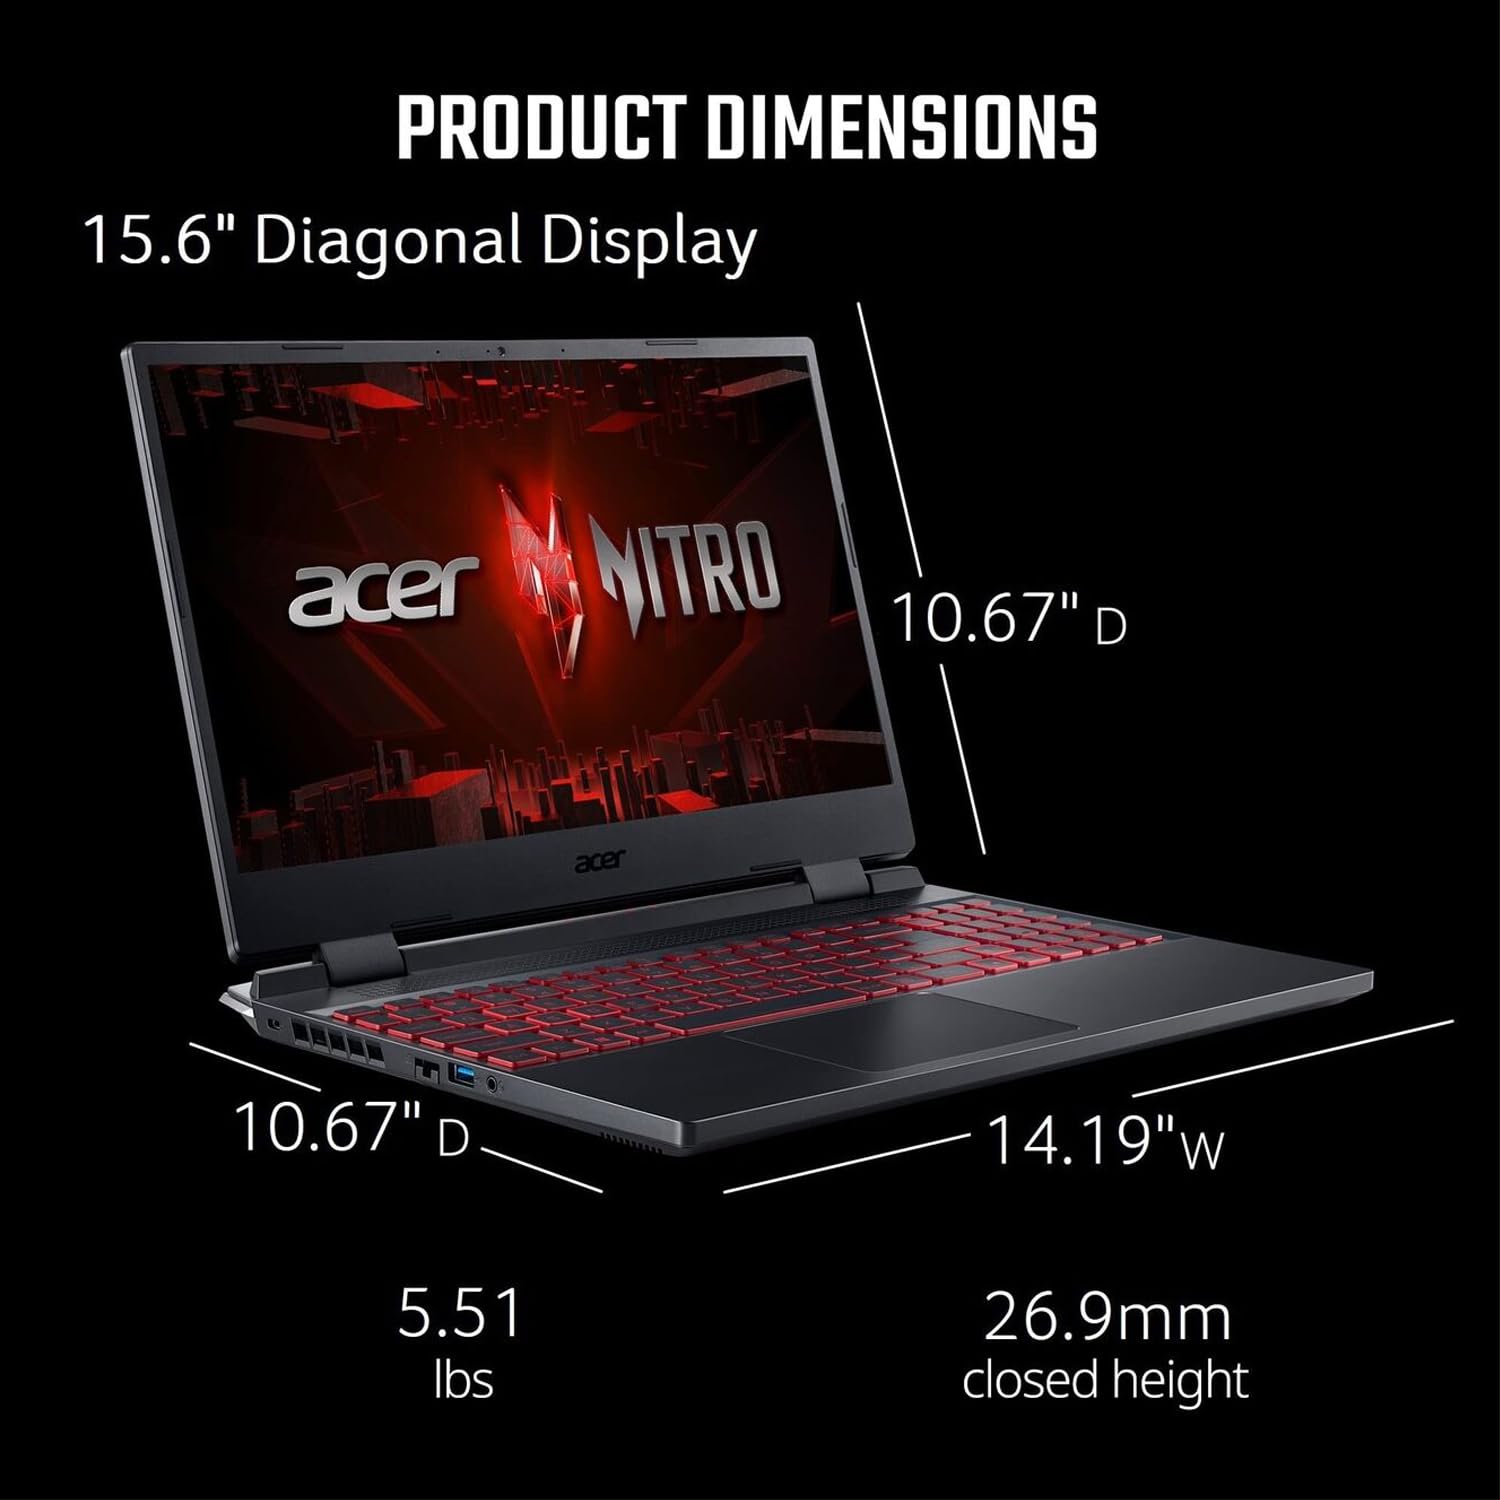 acer Nitro 5 Gaming Laptop, 15.6" FHD IPS 144Hz Display, 12th Gen Intel 12-Core i5-12500H, GeForce RTX 3050, 64GB RAM, 2TB PCIe SSD, Thunderbolt 4, Backlit Keyboard, WiFi6, PDG HDMI Cable, Win 11 Pro